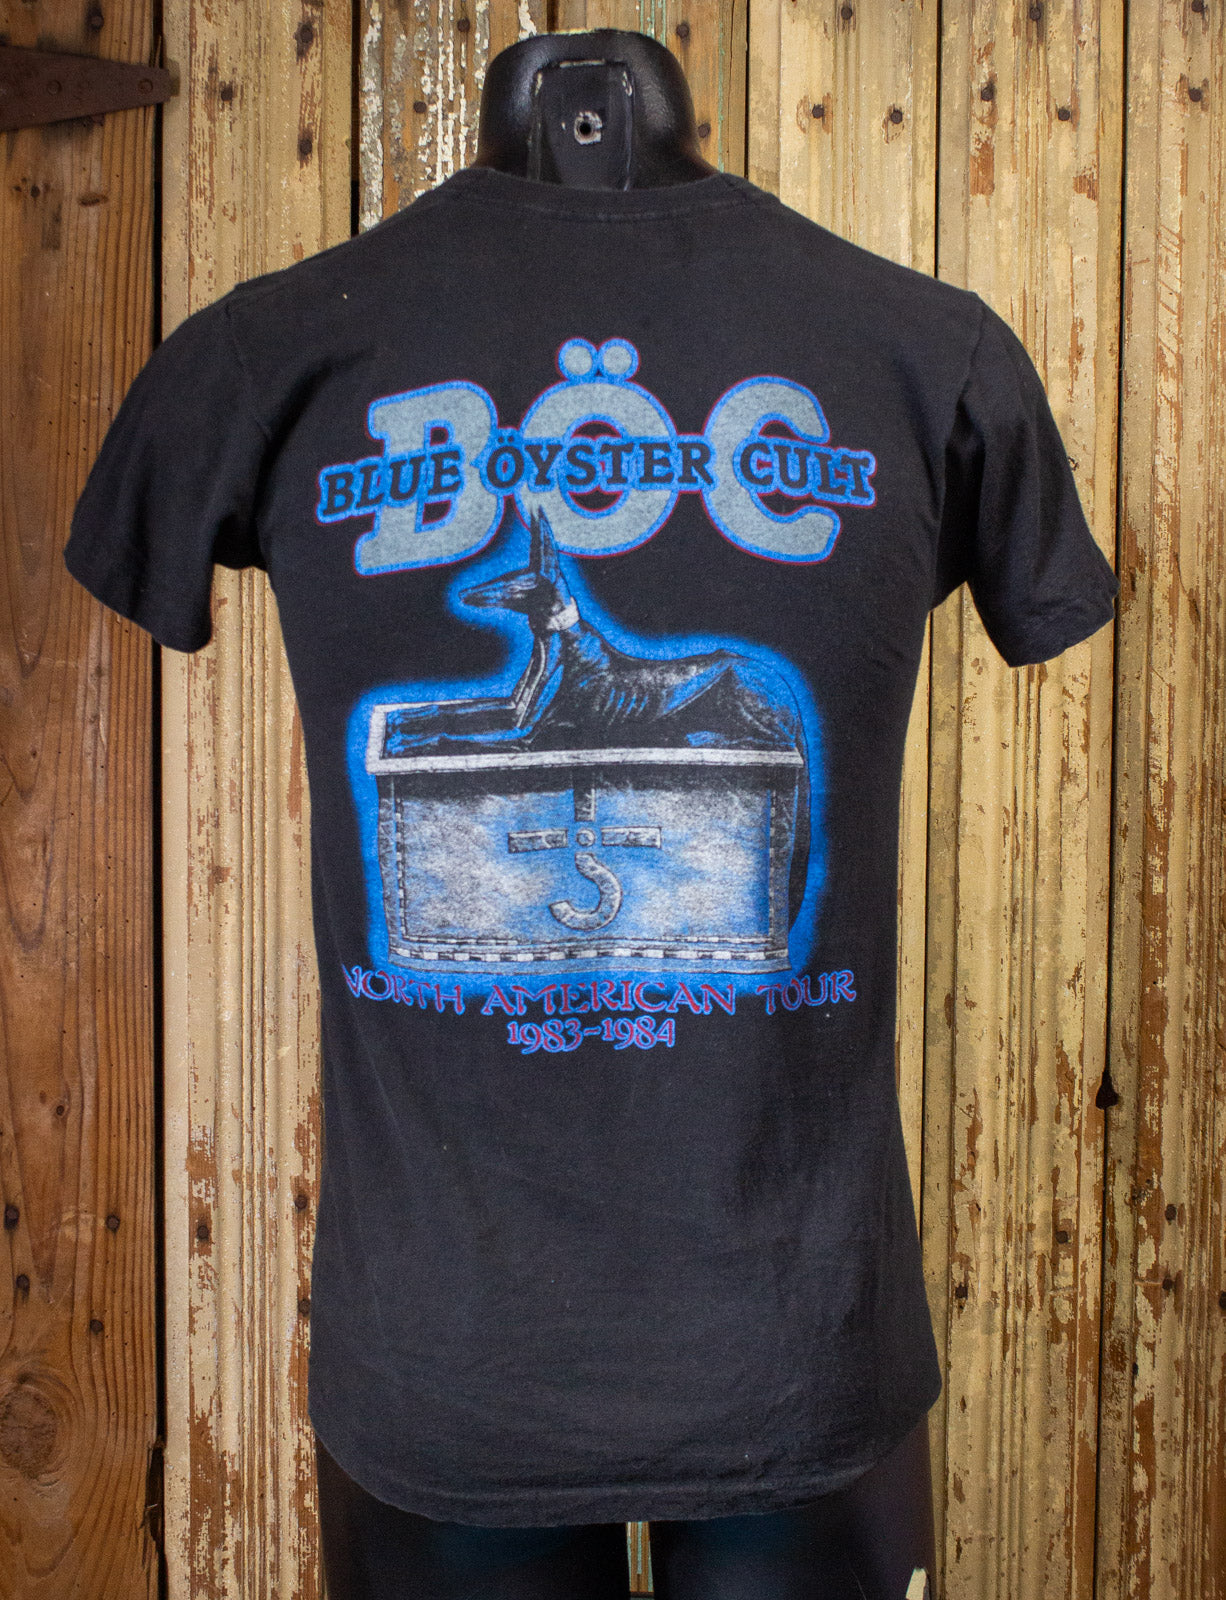 Vintage Blue Oyster Cult The Revolution By Night Concert T Shirt 1983 Small